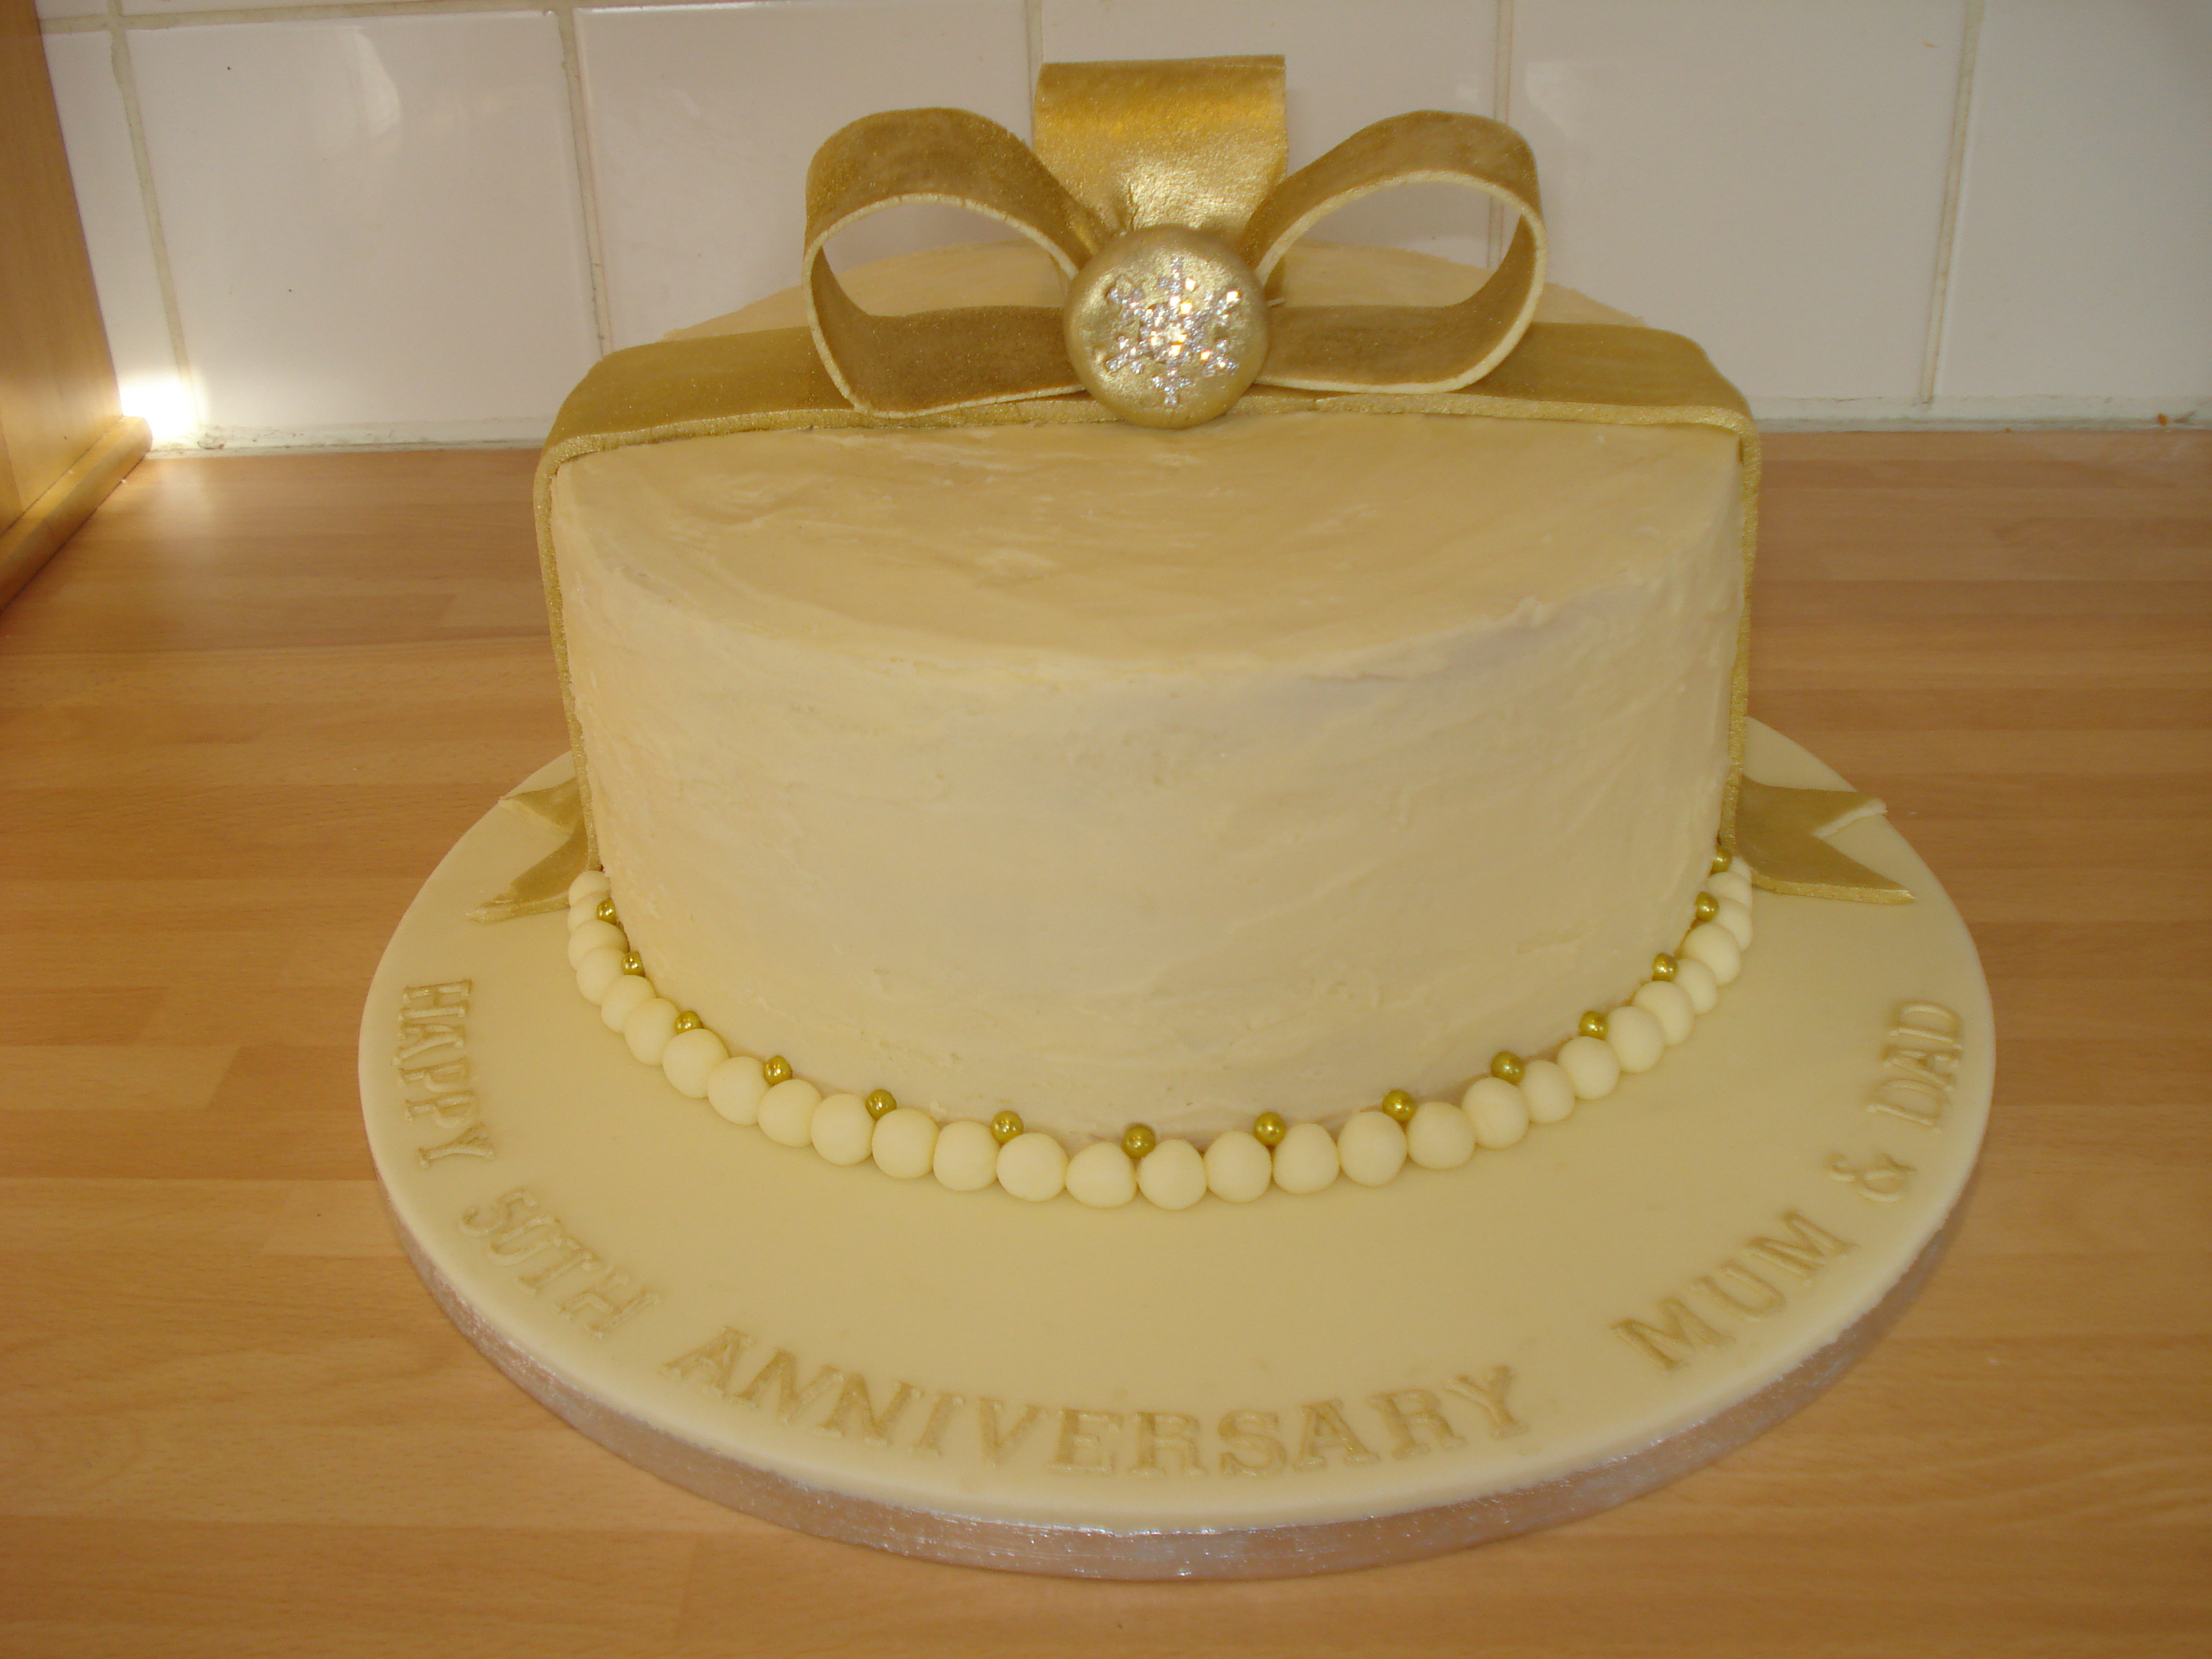 Wedding Anniversary Cakes Images
 Cool Wedding Marriage Anniversary Cakes With Names